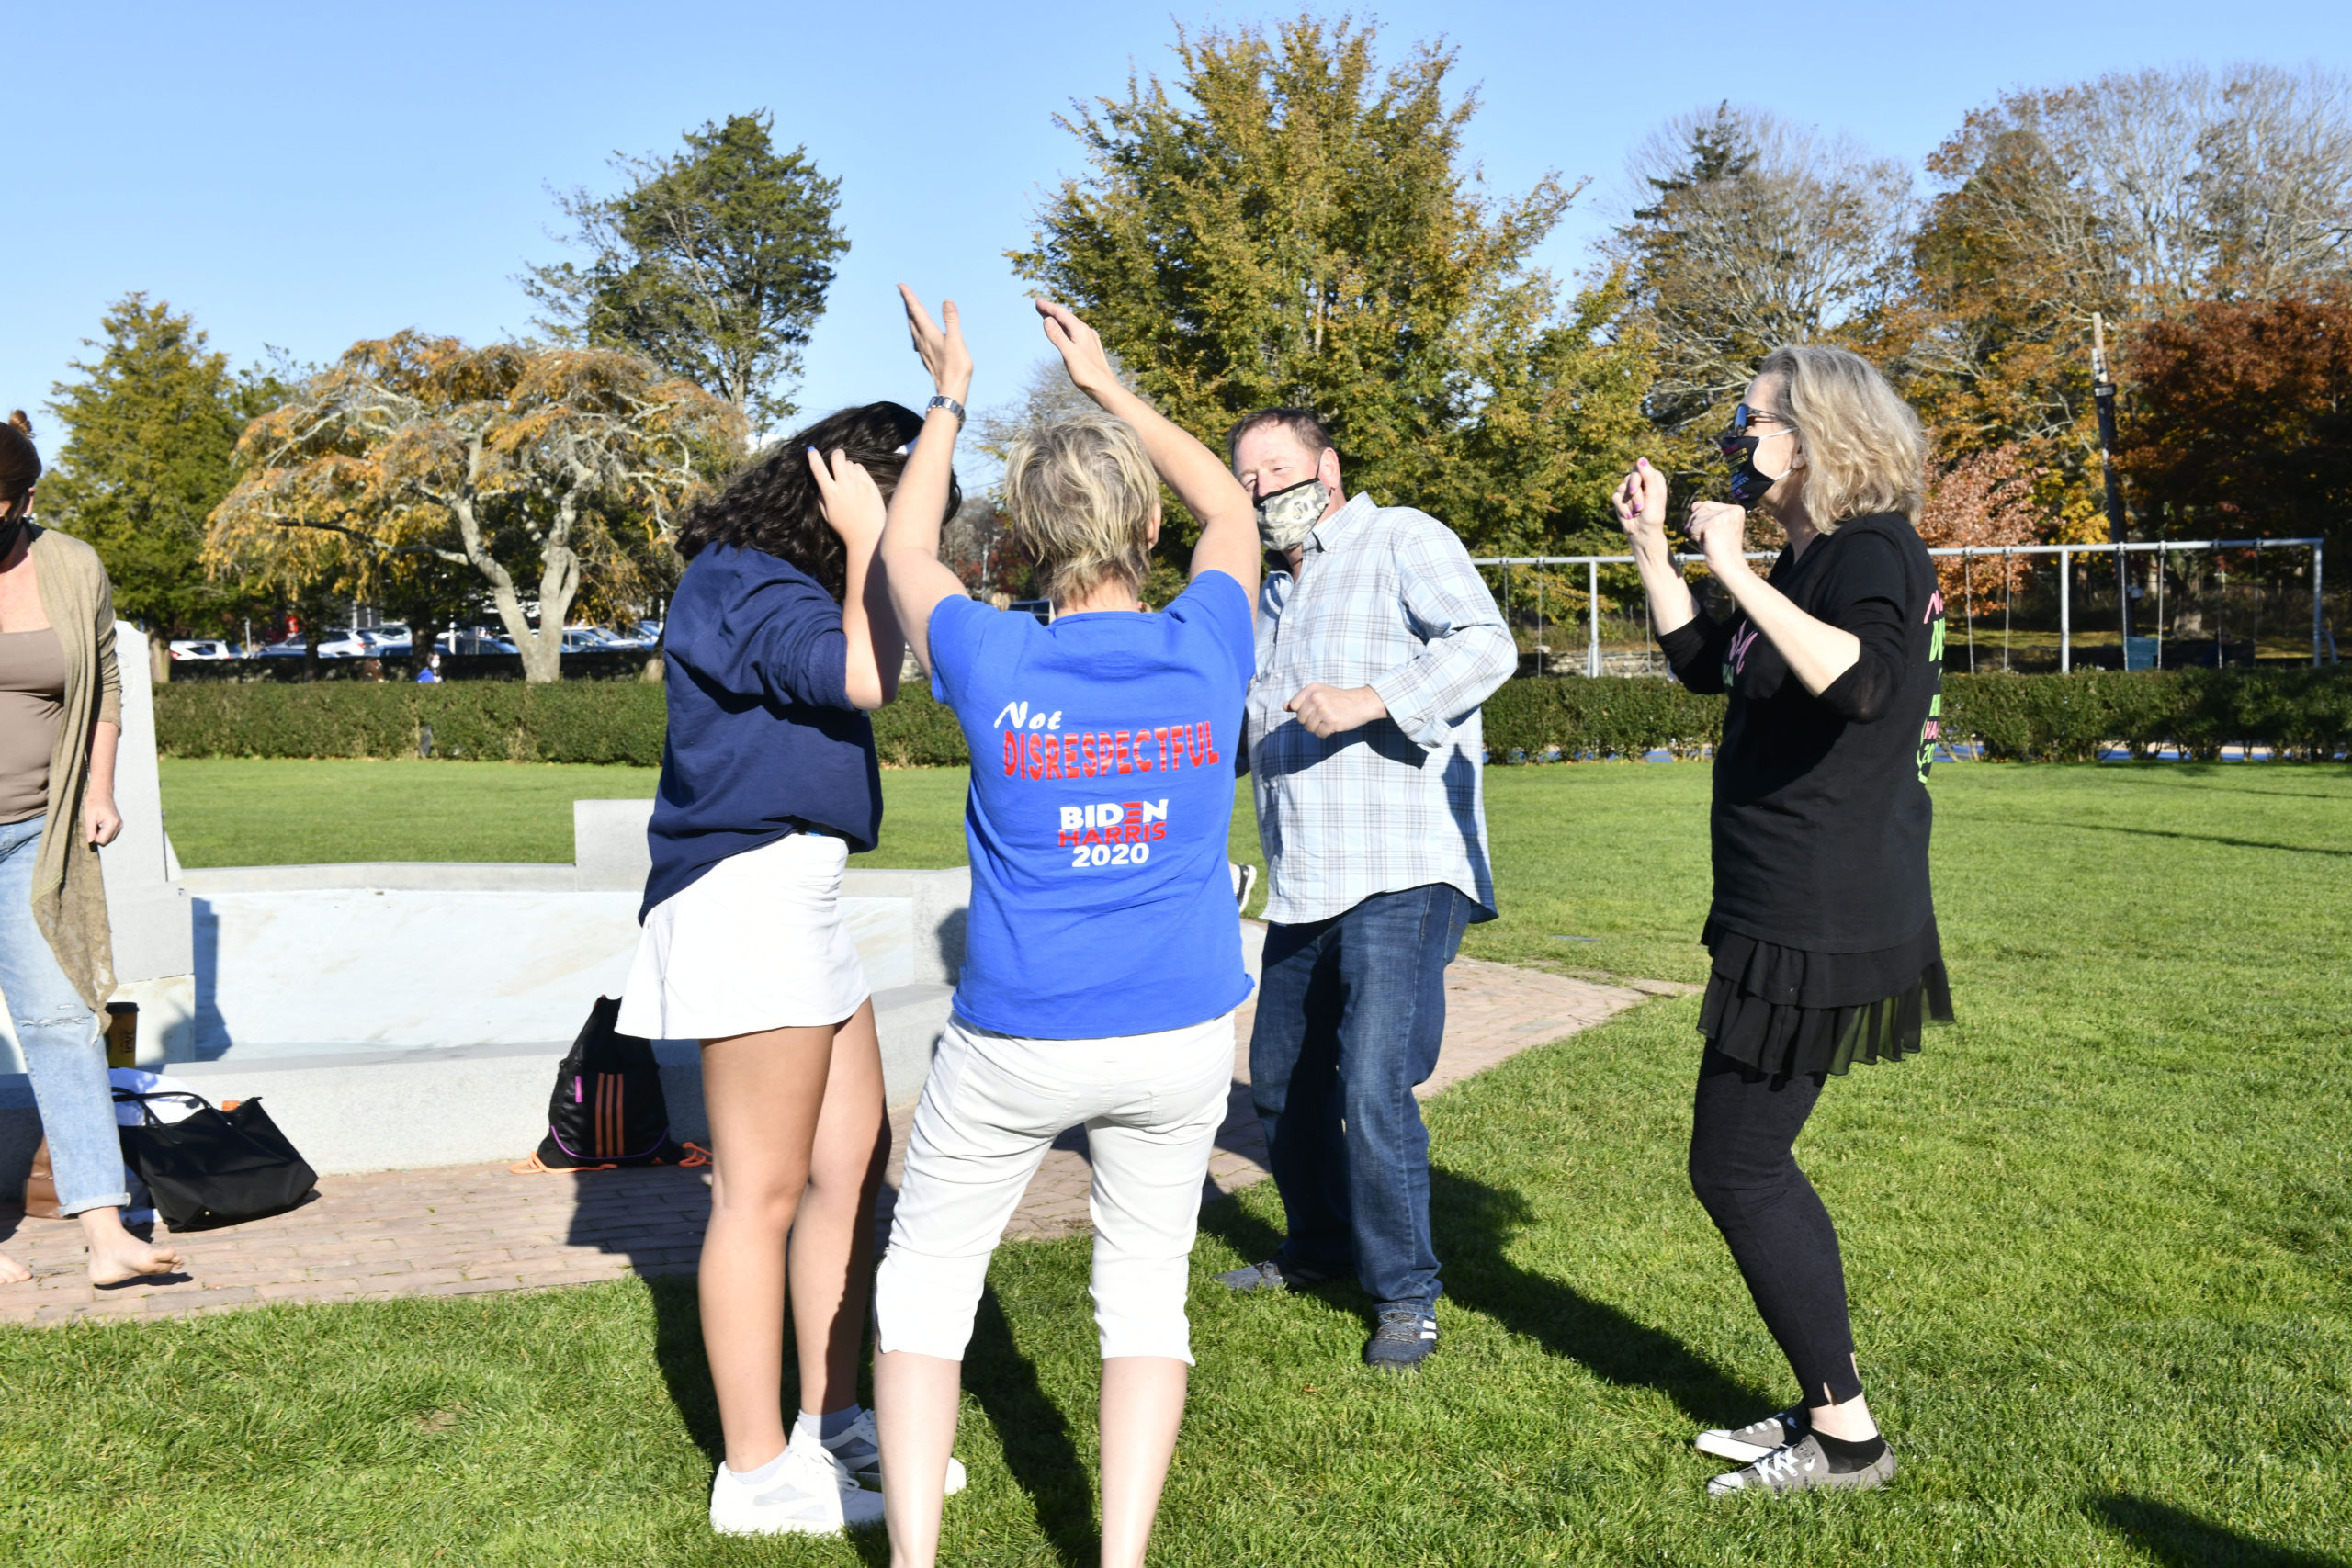 Joe Biden supporters celebrate his victory in Agawam Park on Sunday.   